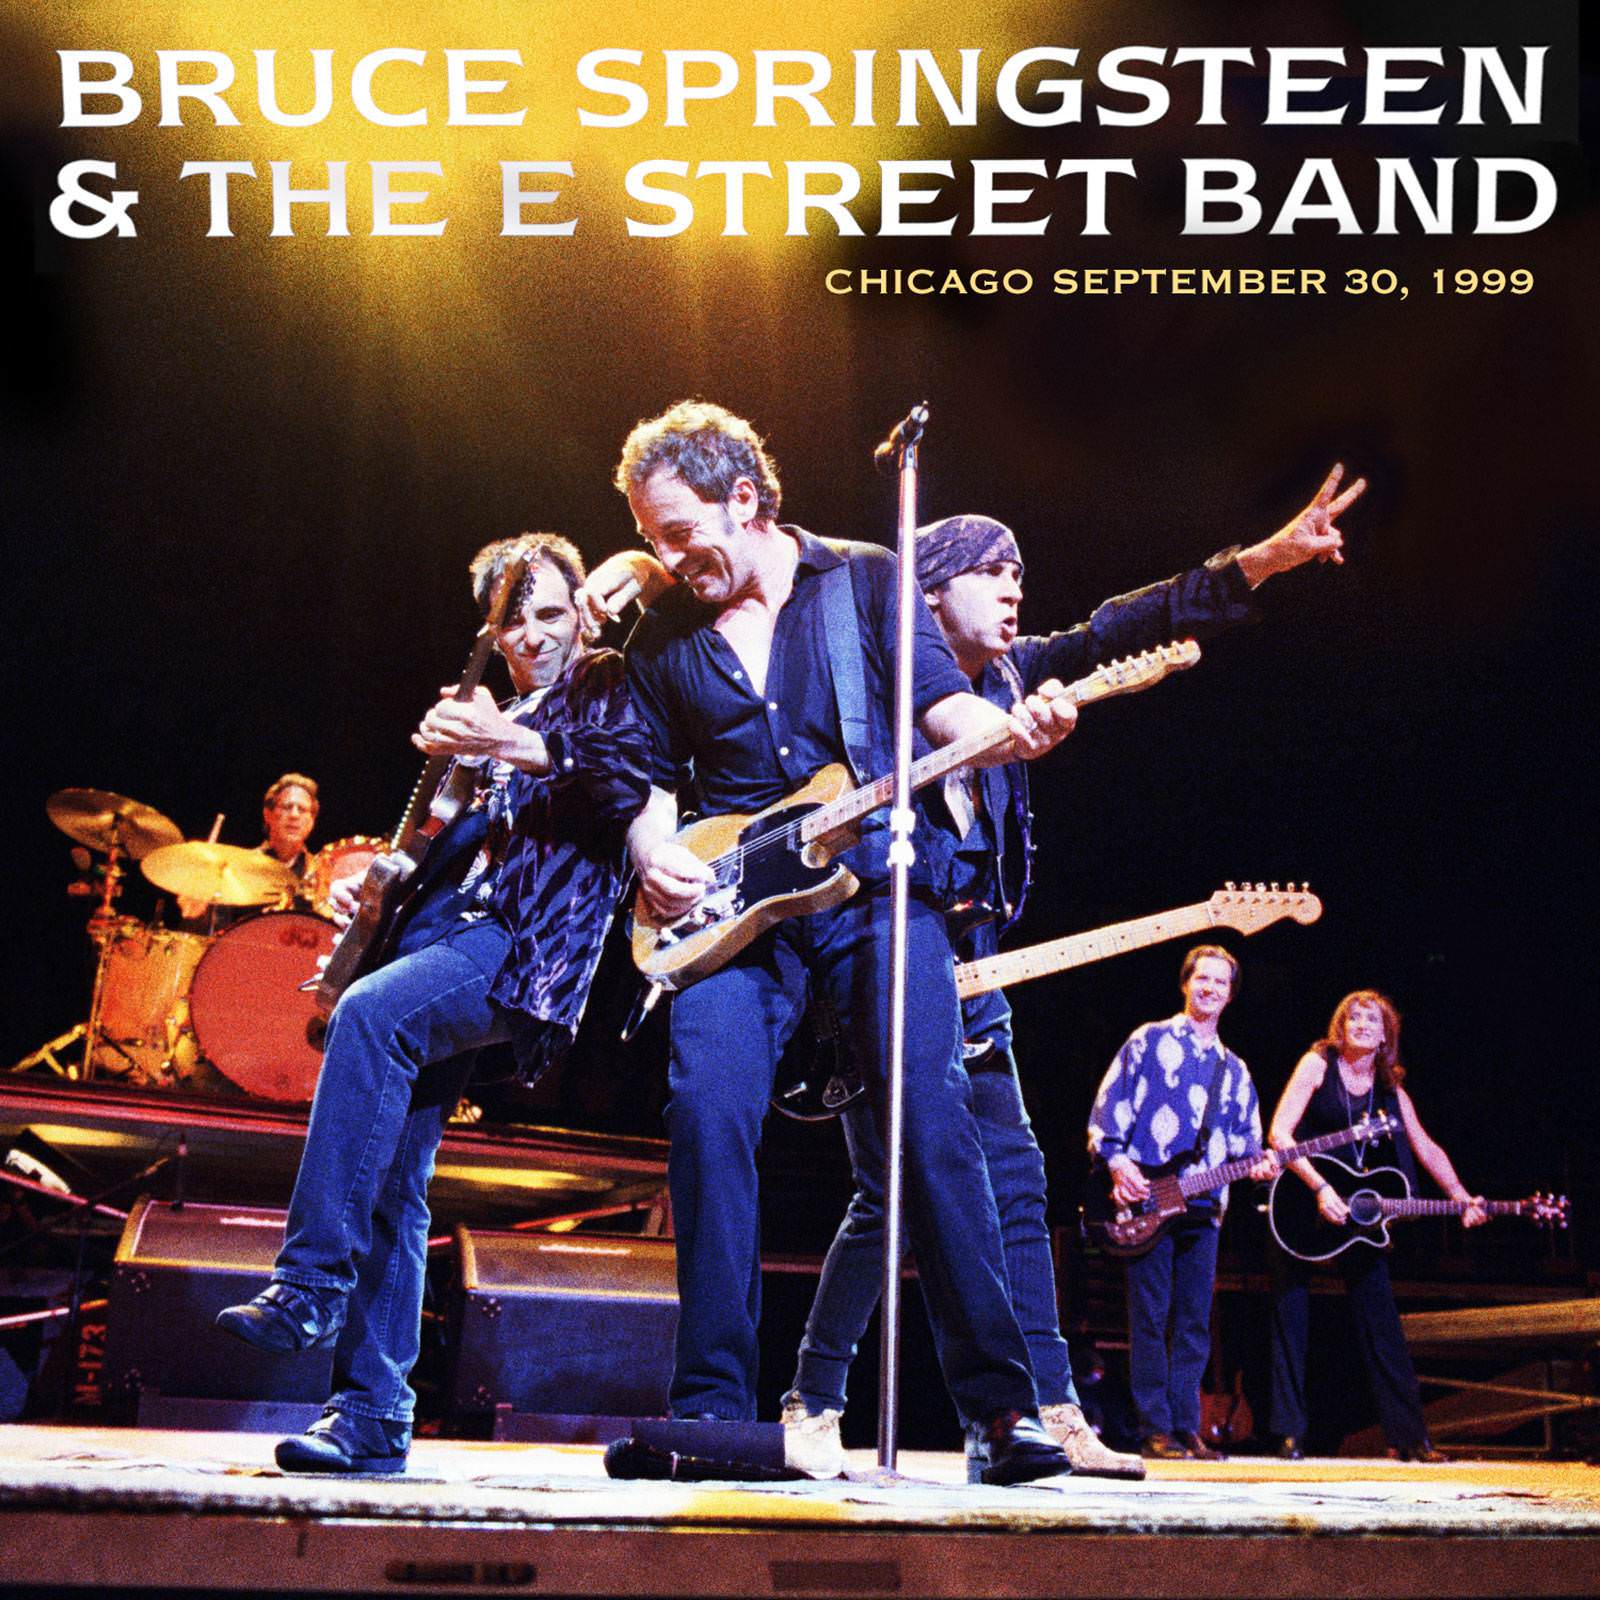 Bruce Springsteen & The E Street Band - 1999/09/30 Chicago, IL (1999) [Official Digital Download 24bit/44,1kHz] Download